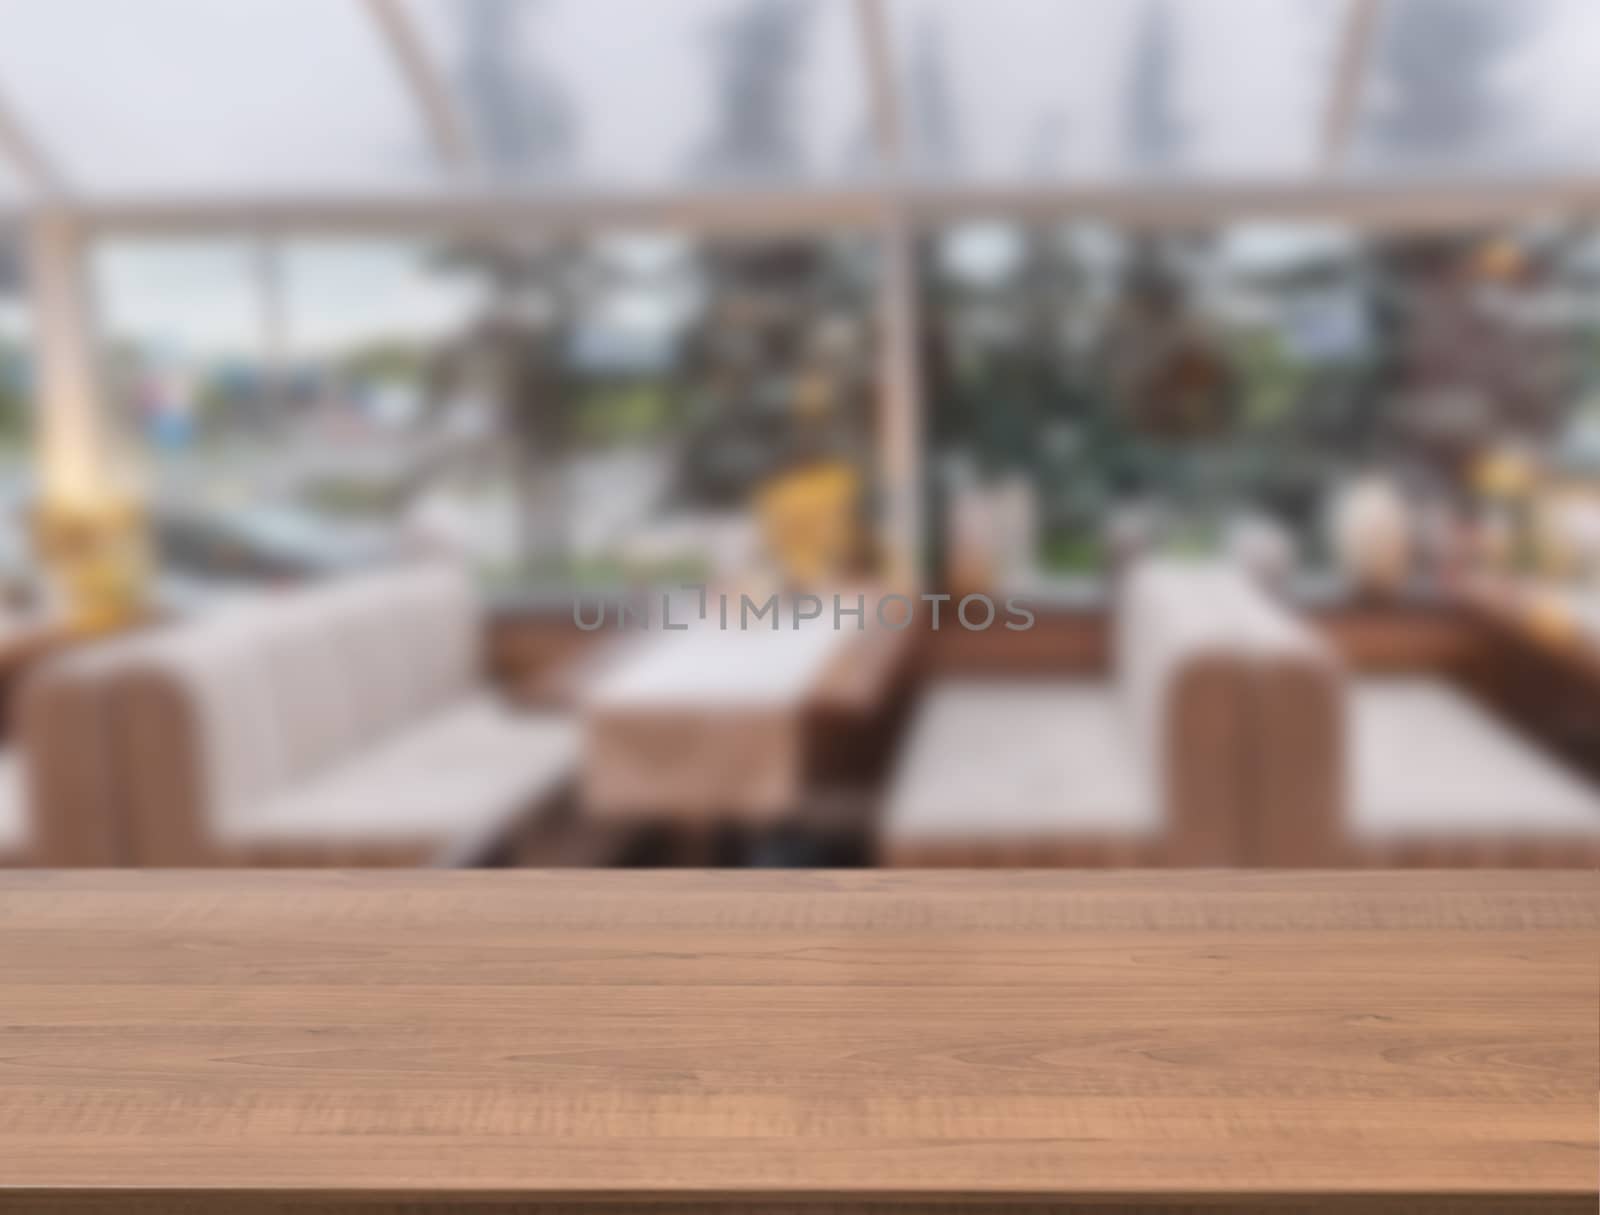 Dark wooden board empty table in front of blurred background. Perspective brown wood over blur in cafe interior - can be used for display or montage our products. Mockup your products